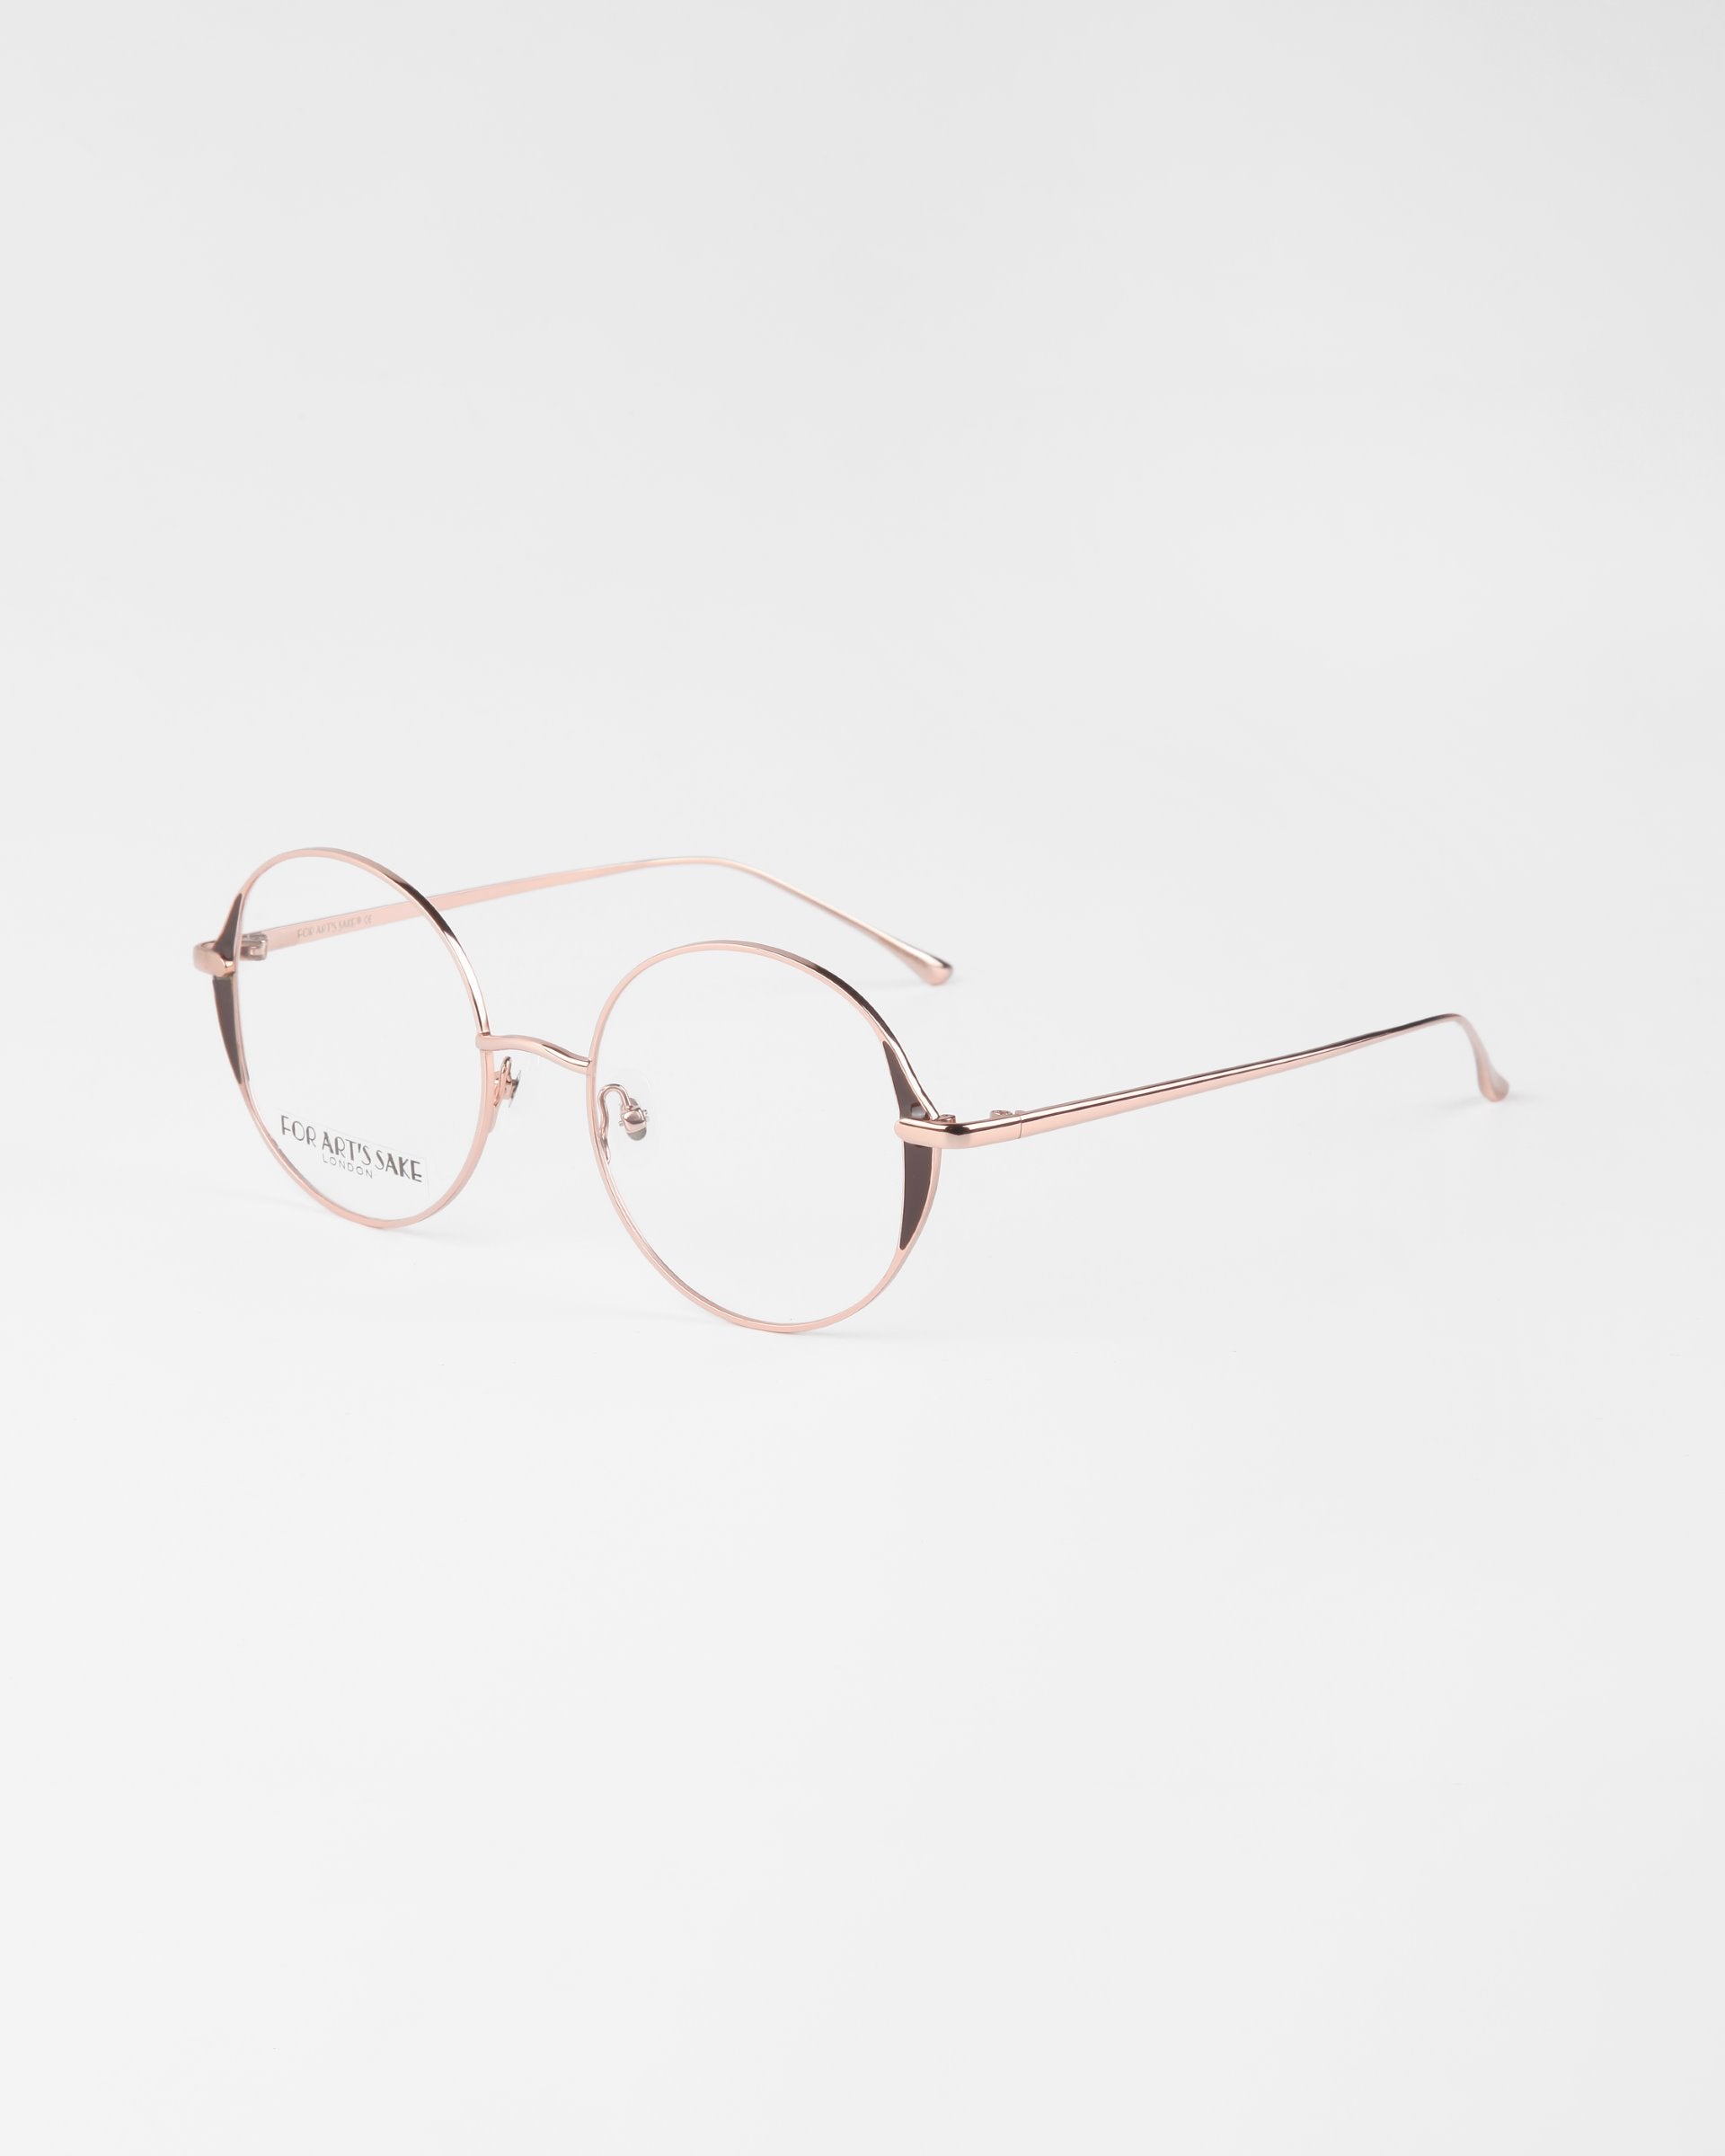 A pair of round, thin-framed, gold-rimmed eyeglasses with clear lenses and 18-karat gold plating. The design is minimalist, with delicate frames and no visible embellishments on the glasses. The glasses are called Kos by For Art's Sake® and are placed on a plain white background.